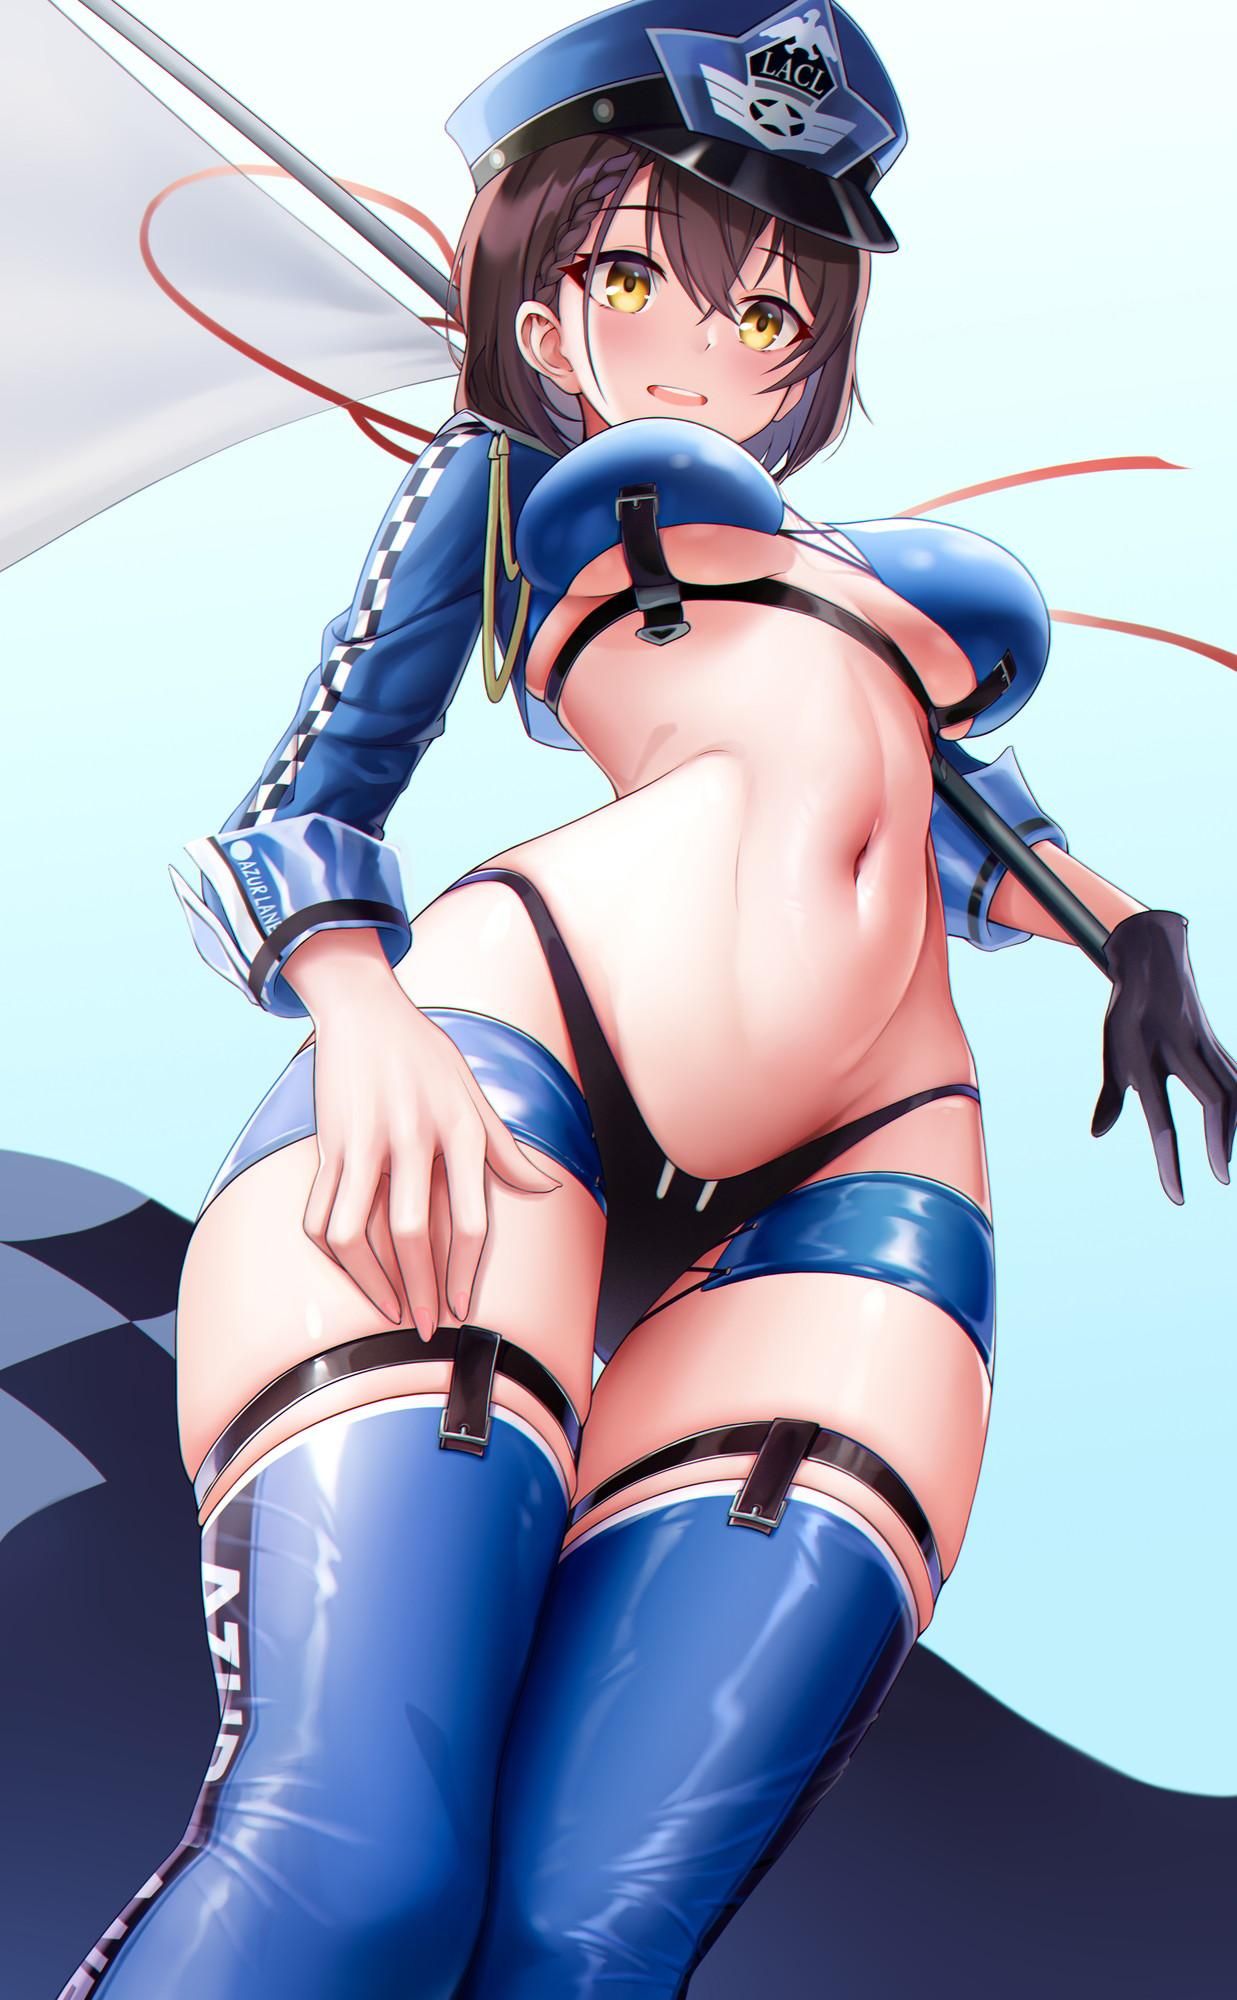 【Erotic images】I collected cute Baltimore images, but they are too erotic ... (Azure Lane) 11